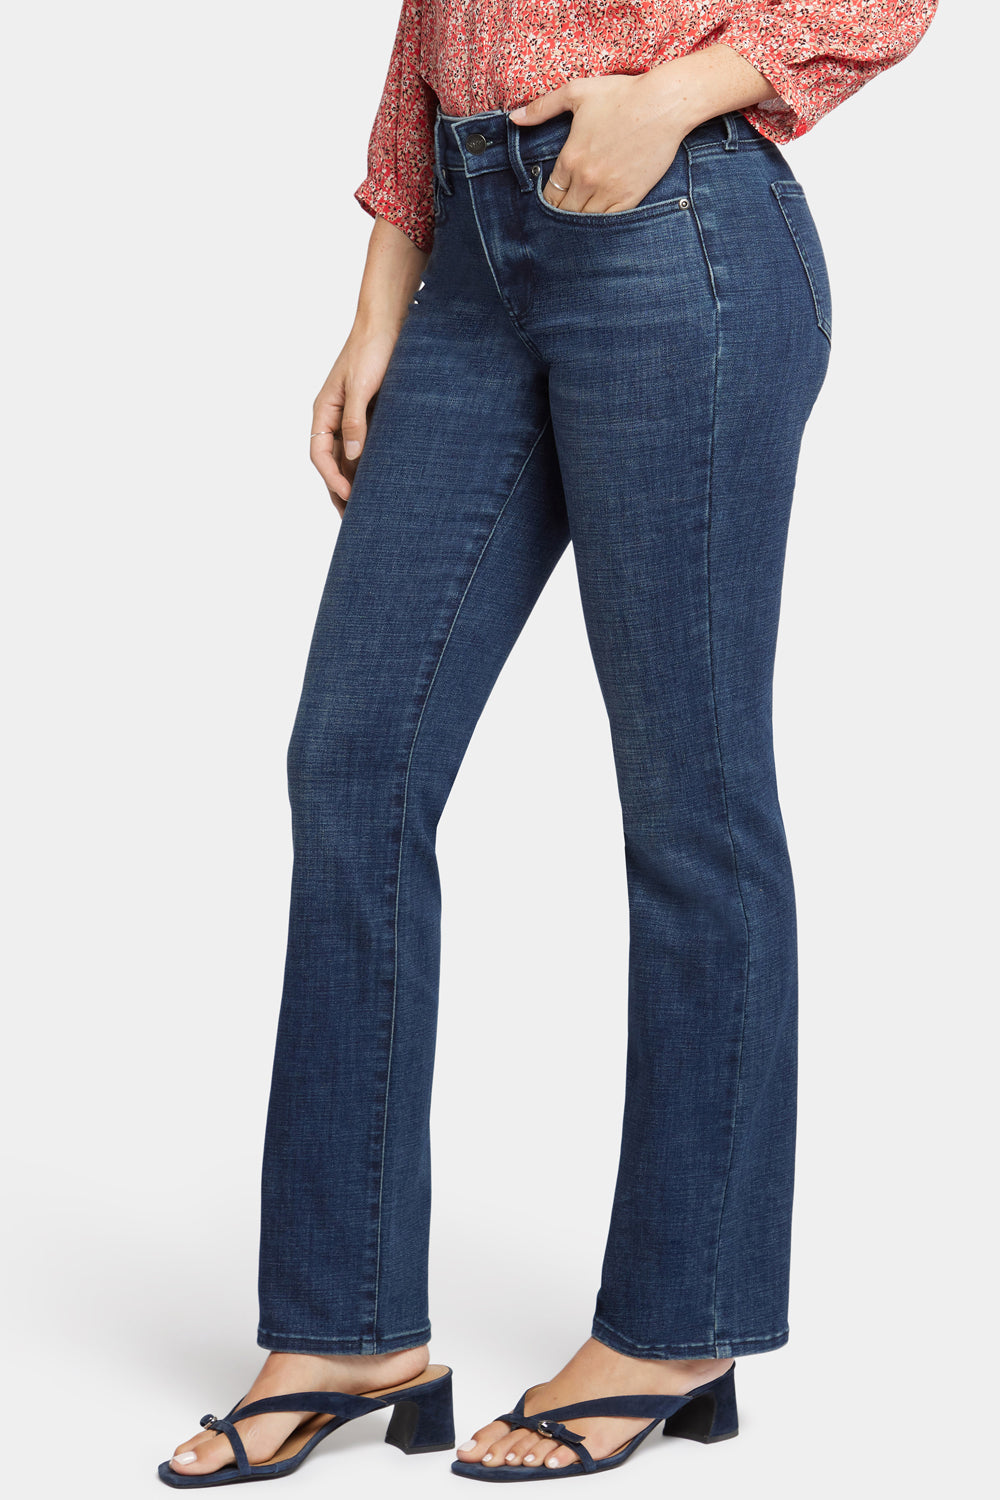 NYDJ Marilyn Straight Jeans  - Mesquite